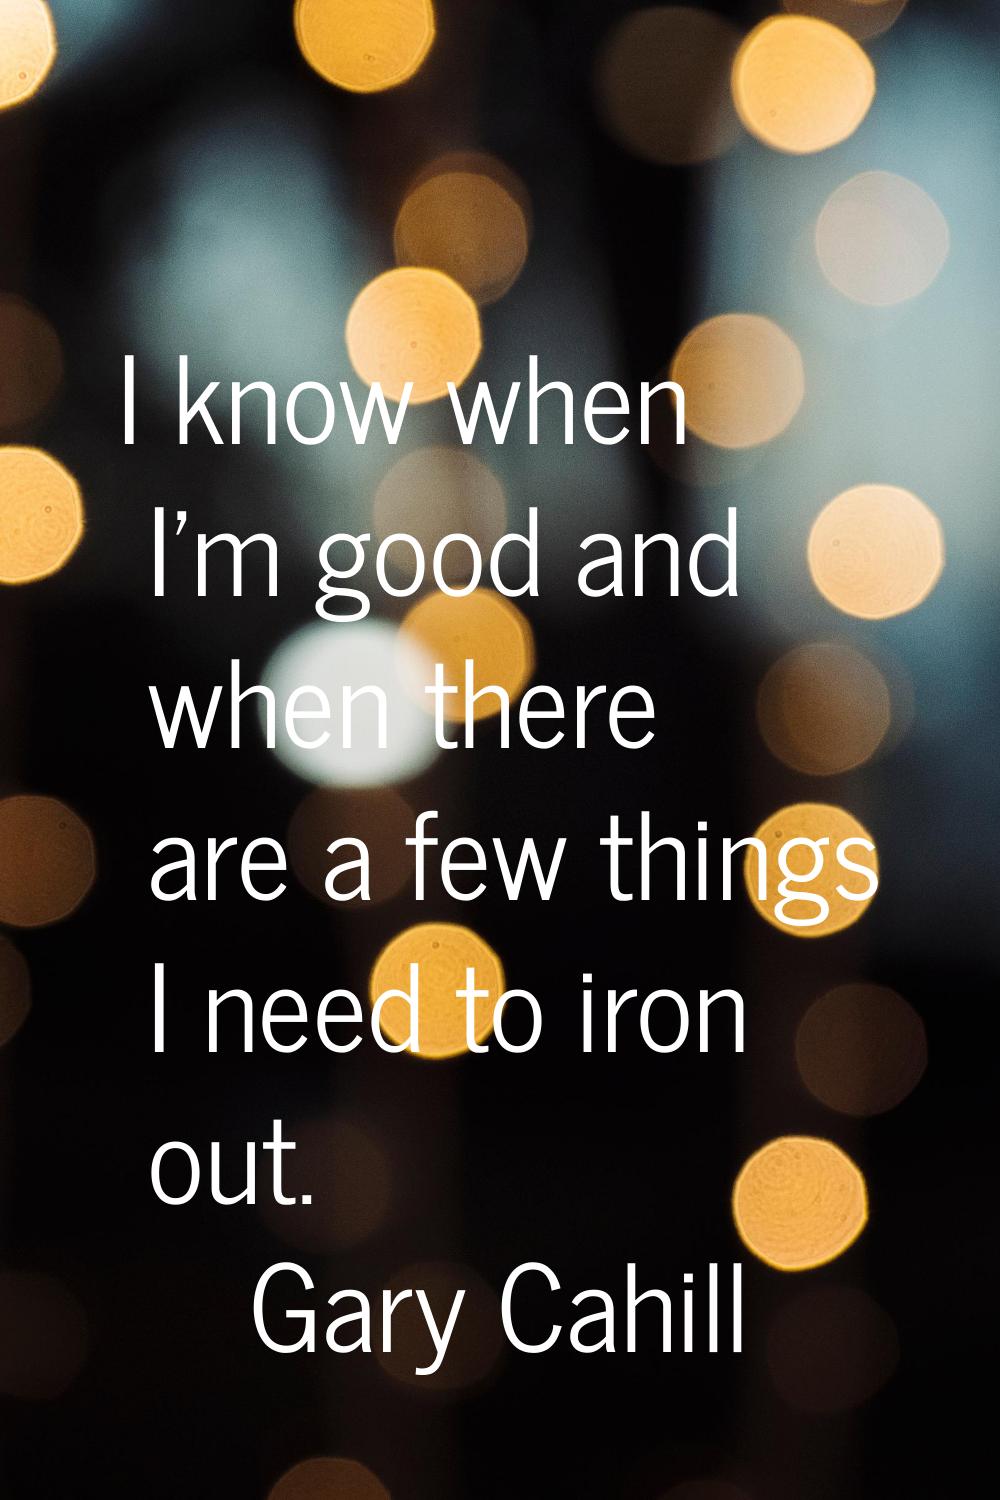 I know when I'm good and when there are a few things I need to iron out.